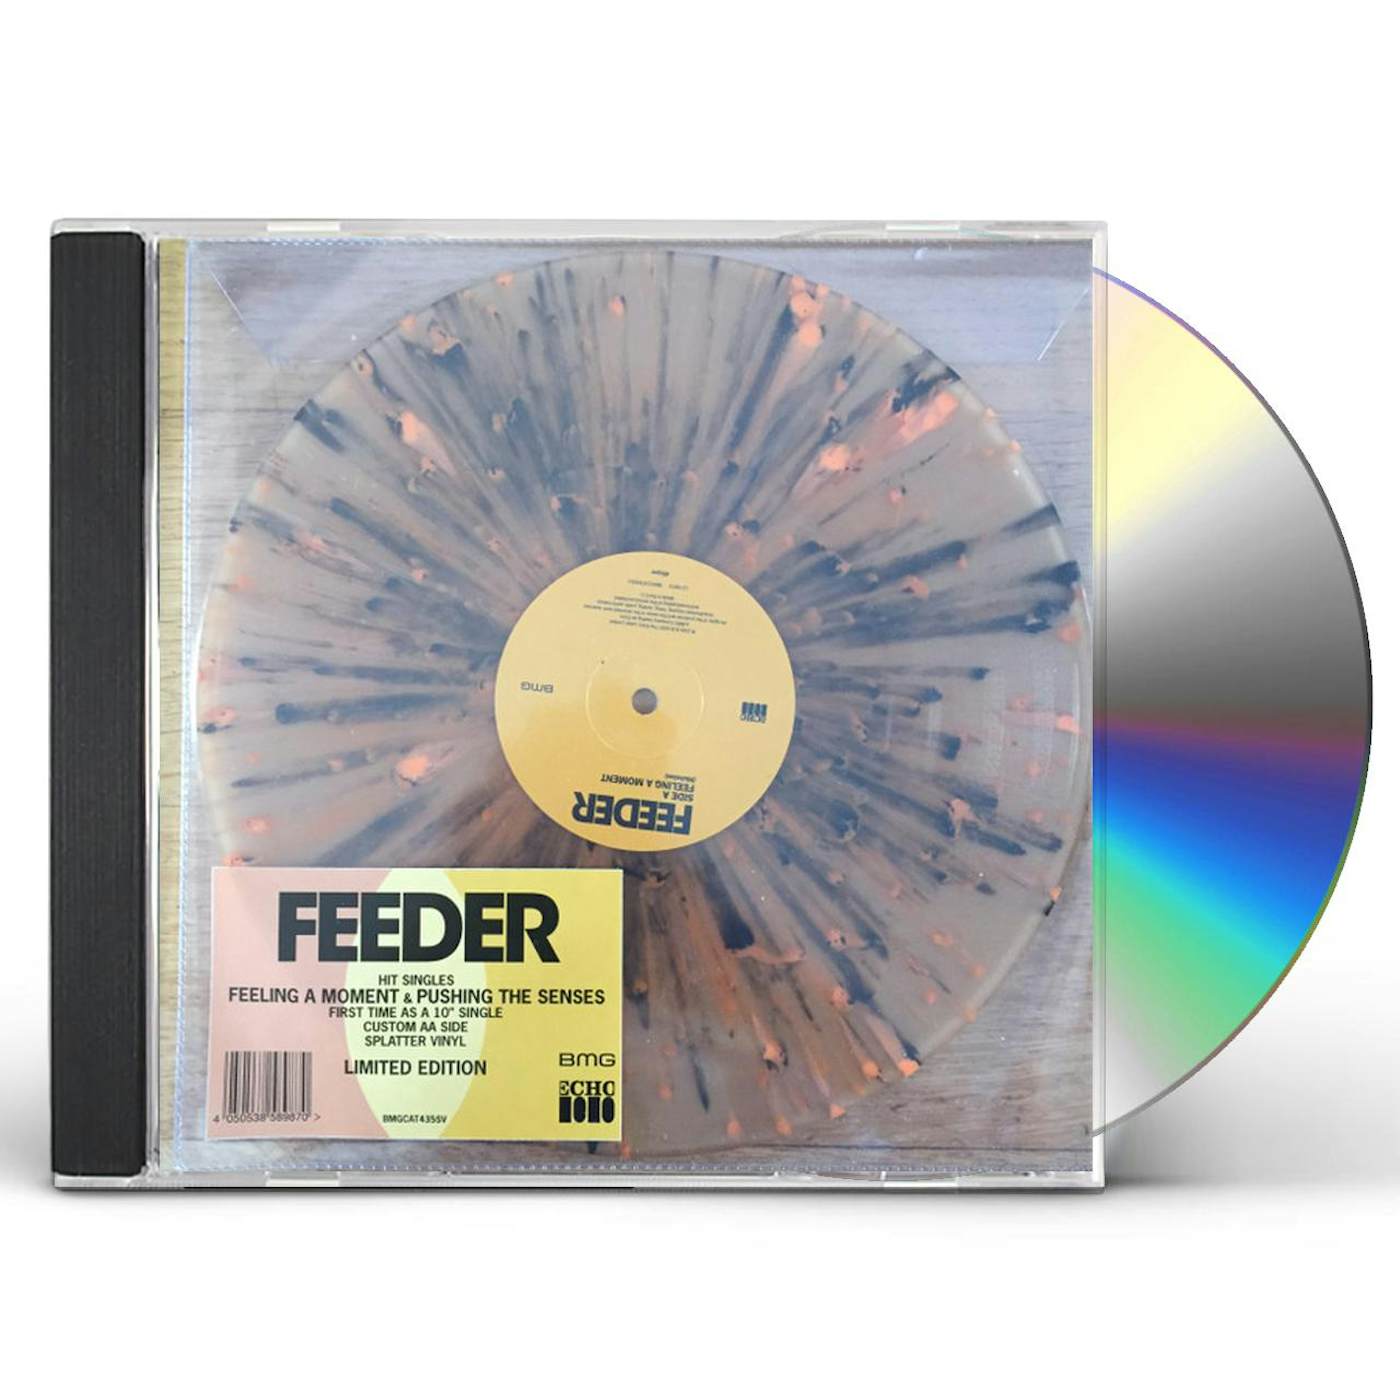 Feeder Feeling A Moment / The Pushing Vinyl Record